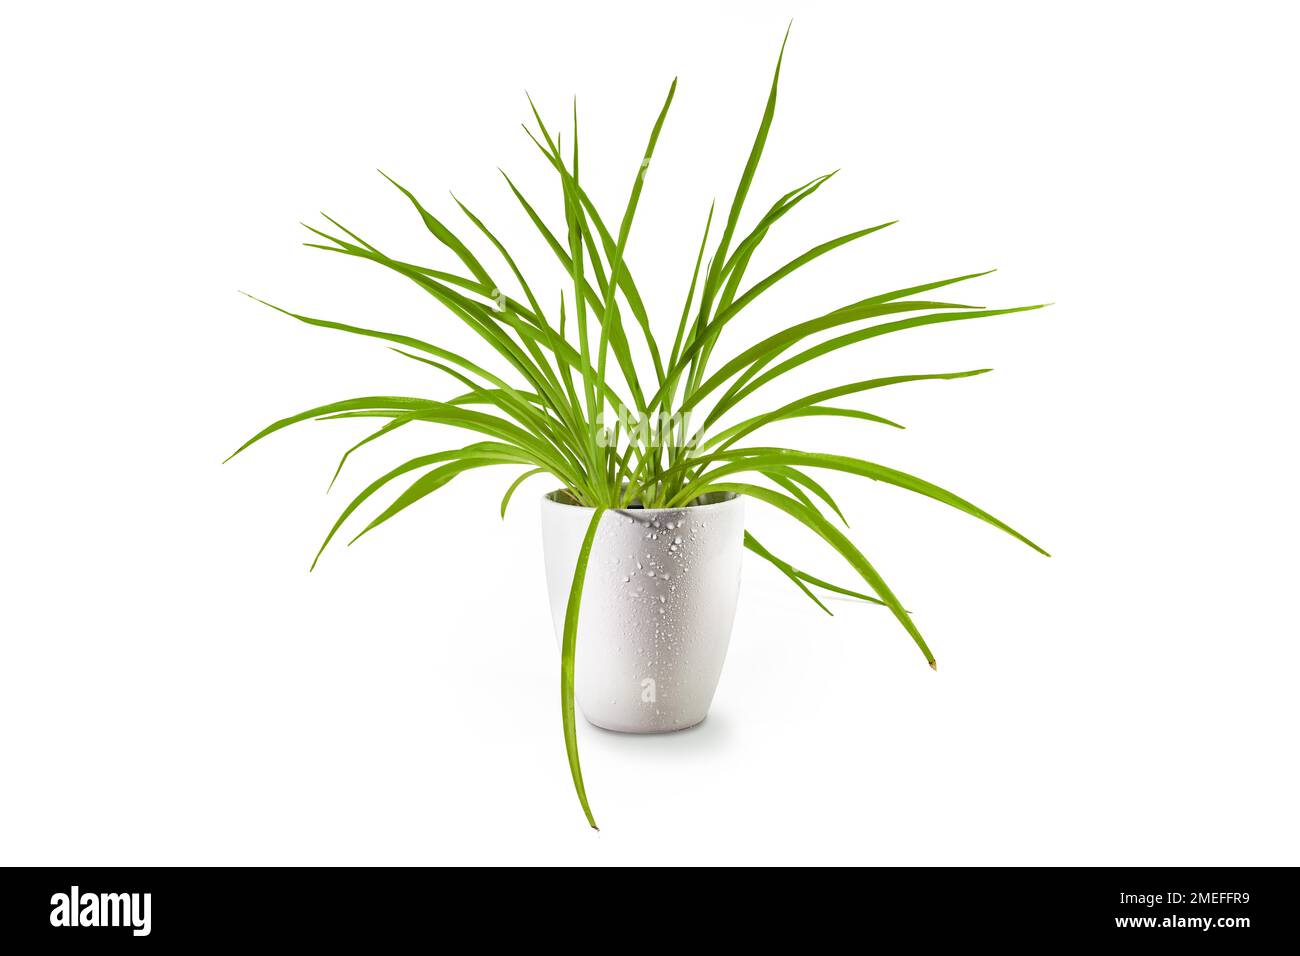 Spider plant (Chlorophytum comosum), an evergreen perennial with long green leaves potted as indoor plant in a porcelain planter, isolated on a white Stock Photo